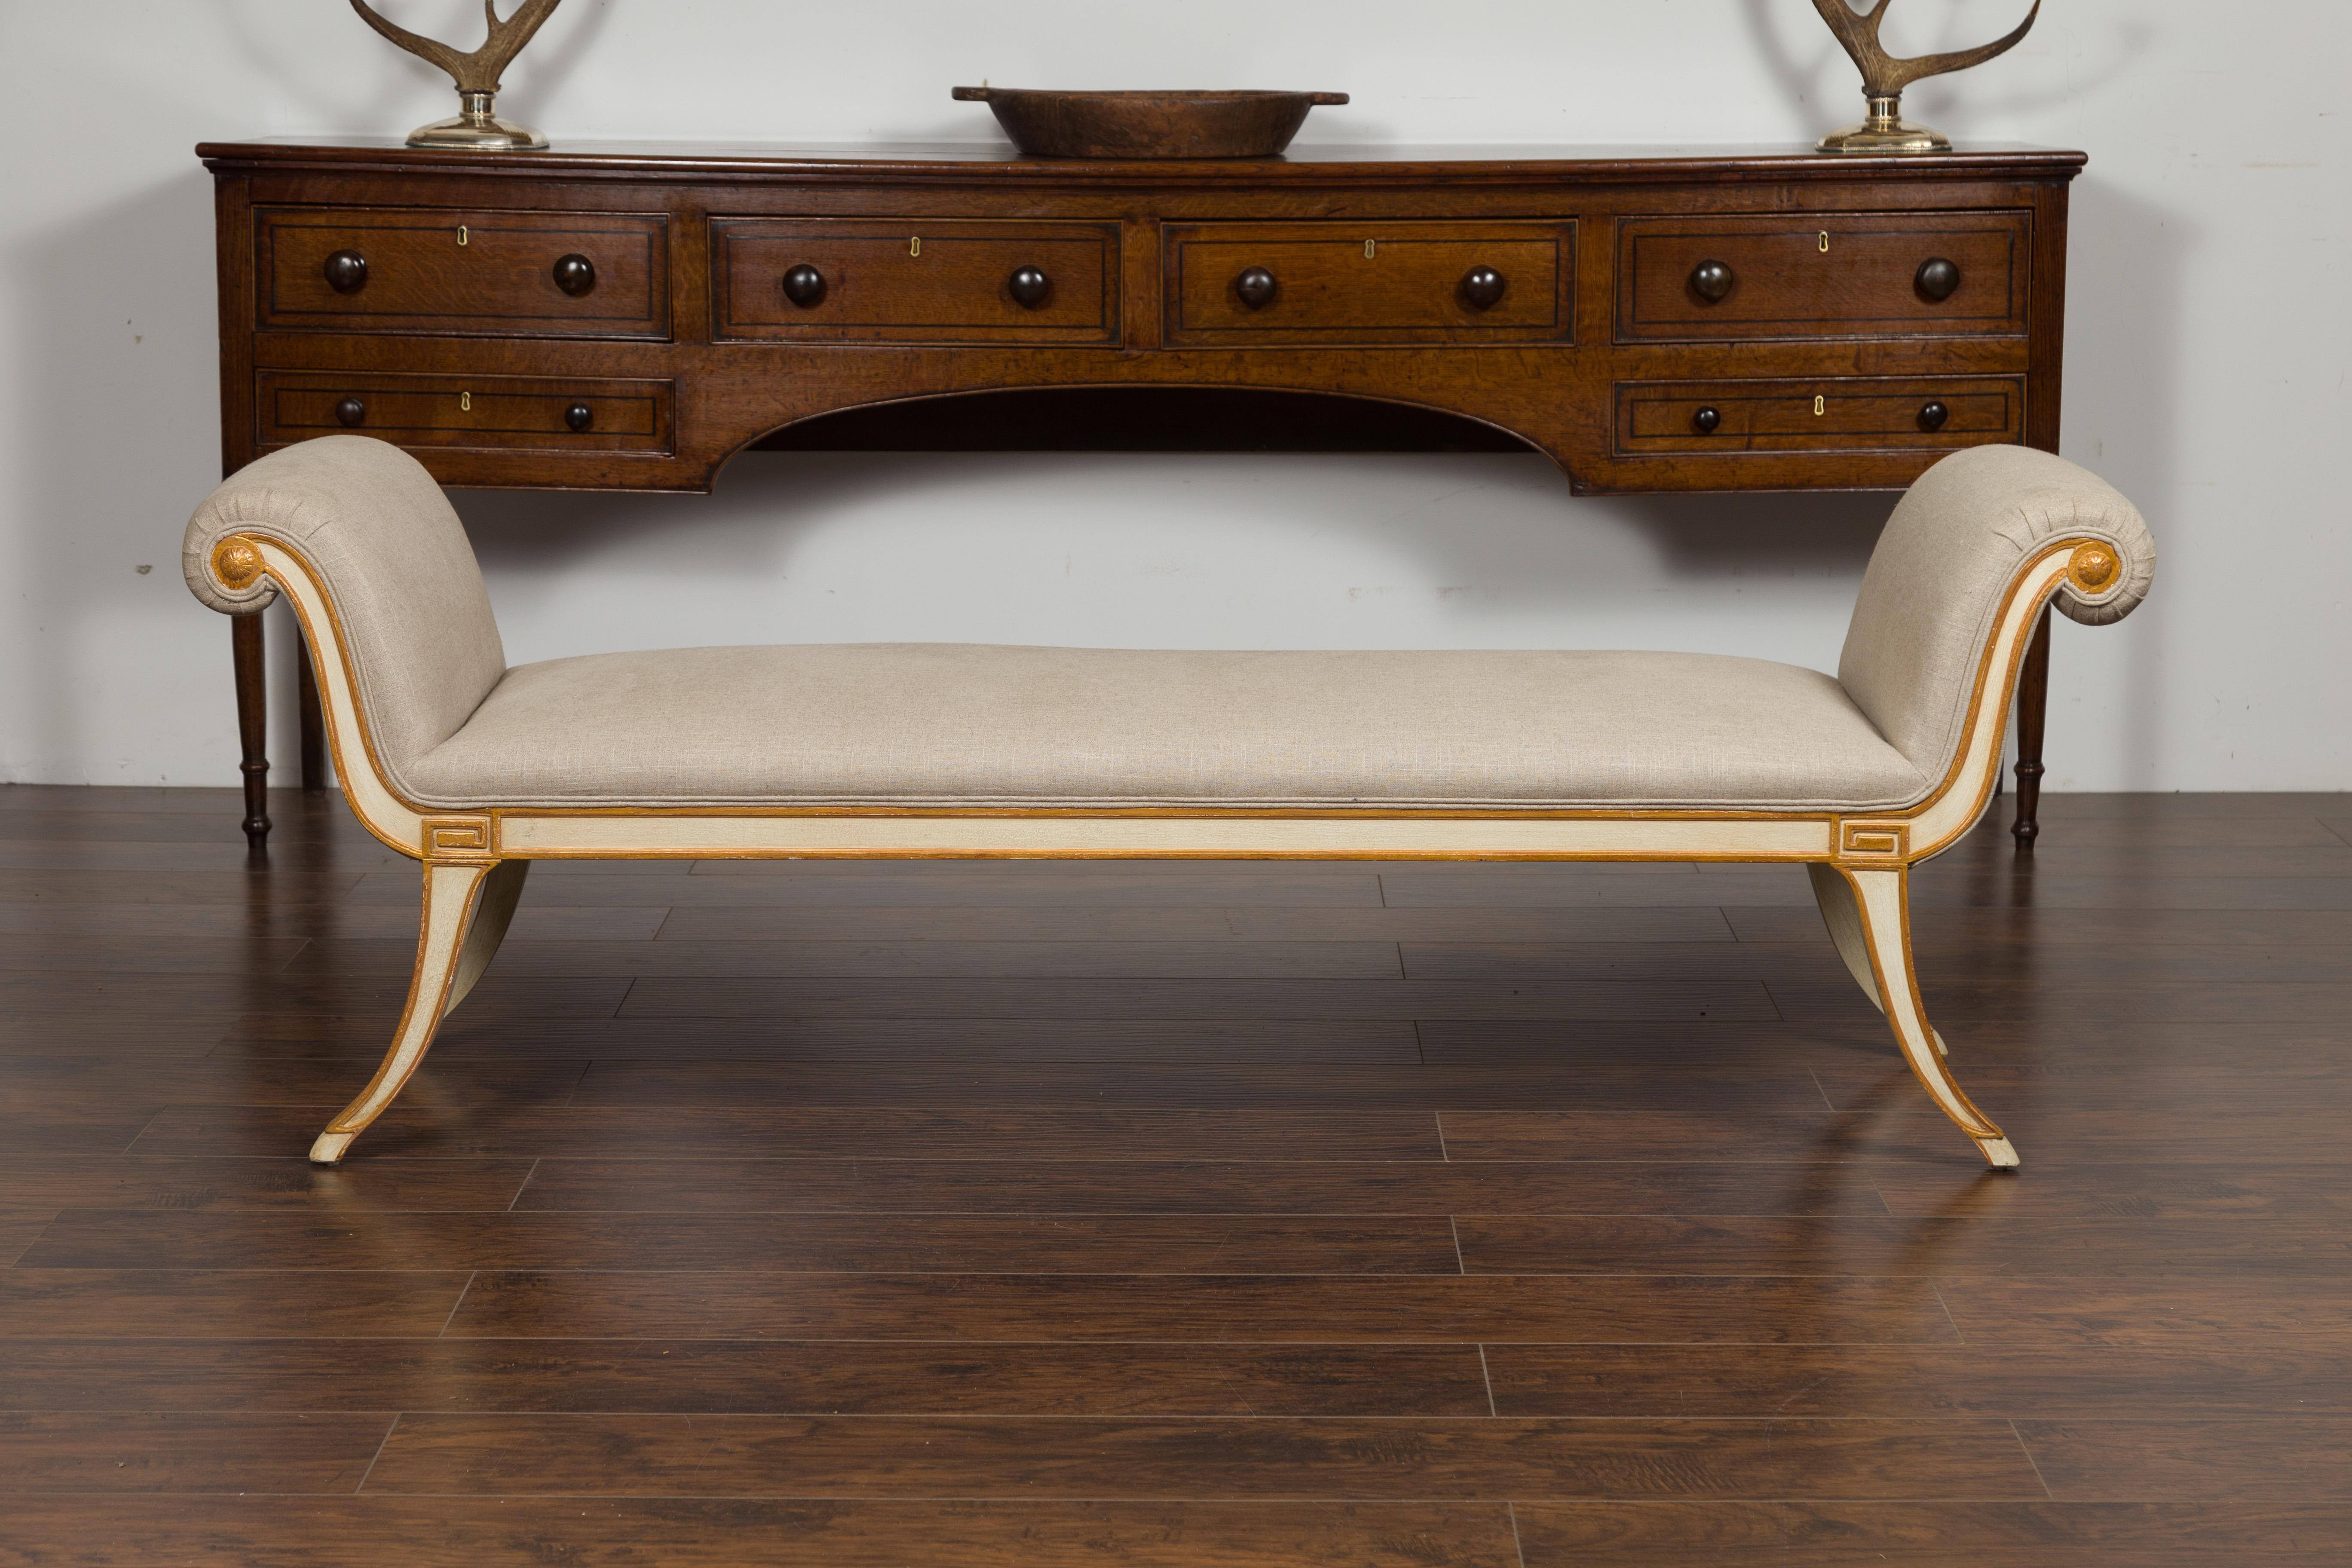 A vintage French Empire style painted and gilded bench from the mid-20th century, with out-scrolling arms, saber legs and new upholstery. Created in France during the midcentury period, this Empire style bench features two out-scrolling arms